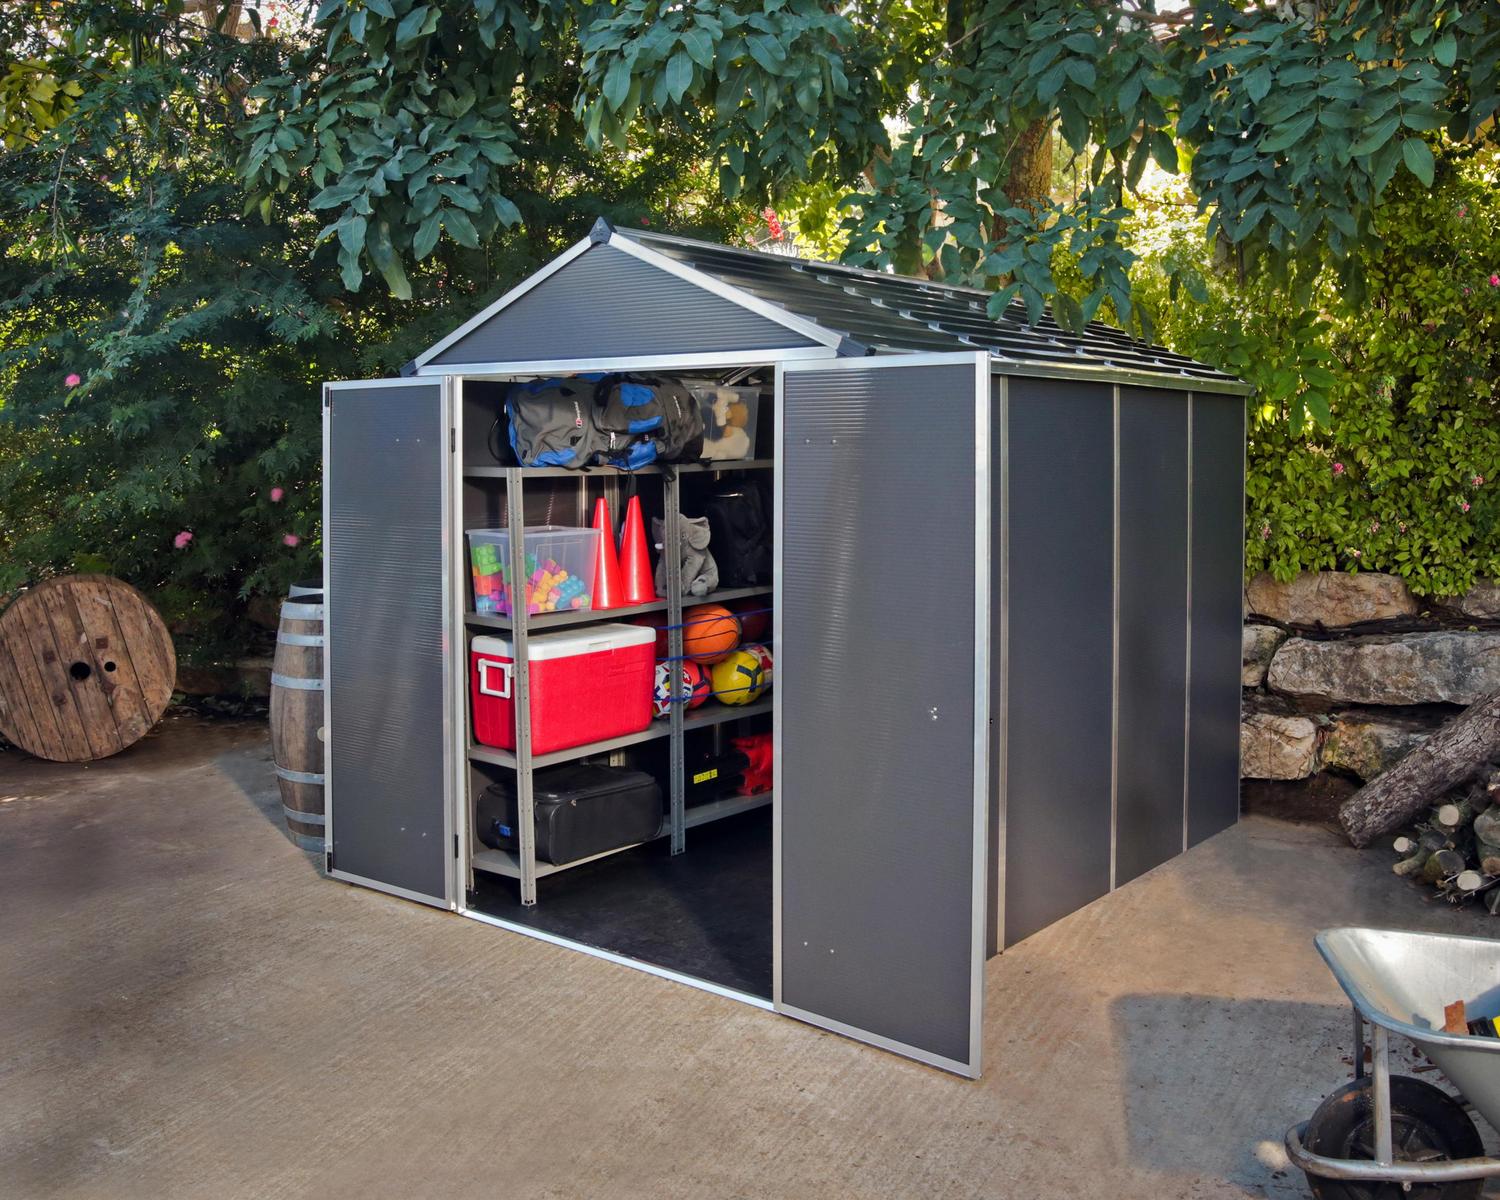 Rubicon 6' x 10' Plastic Garden Shed with Open Doors Dark Grey Polycarbonate Walls and Aluminium Frame